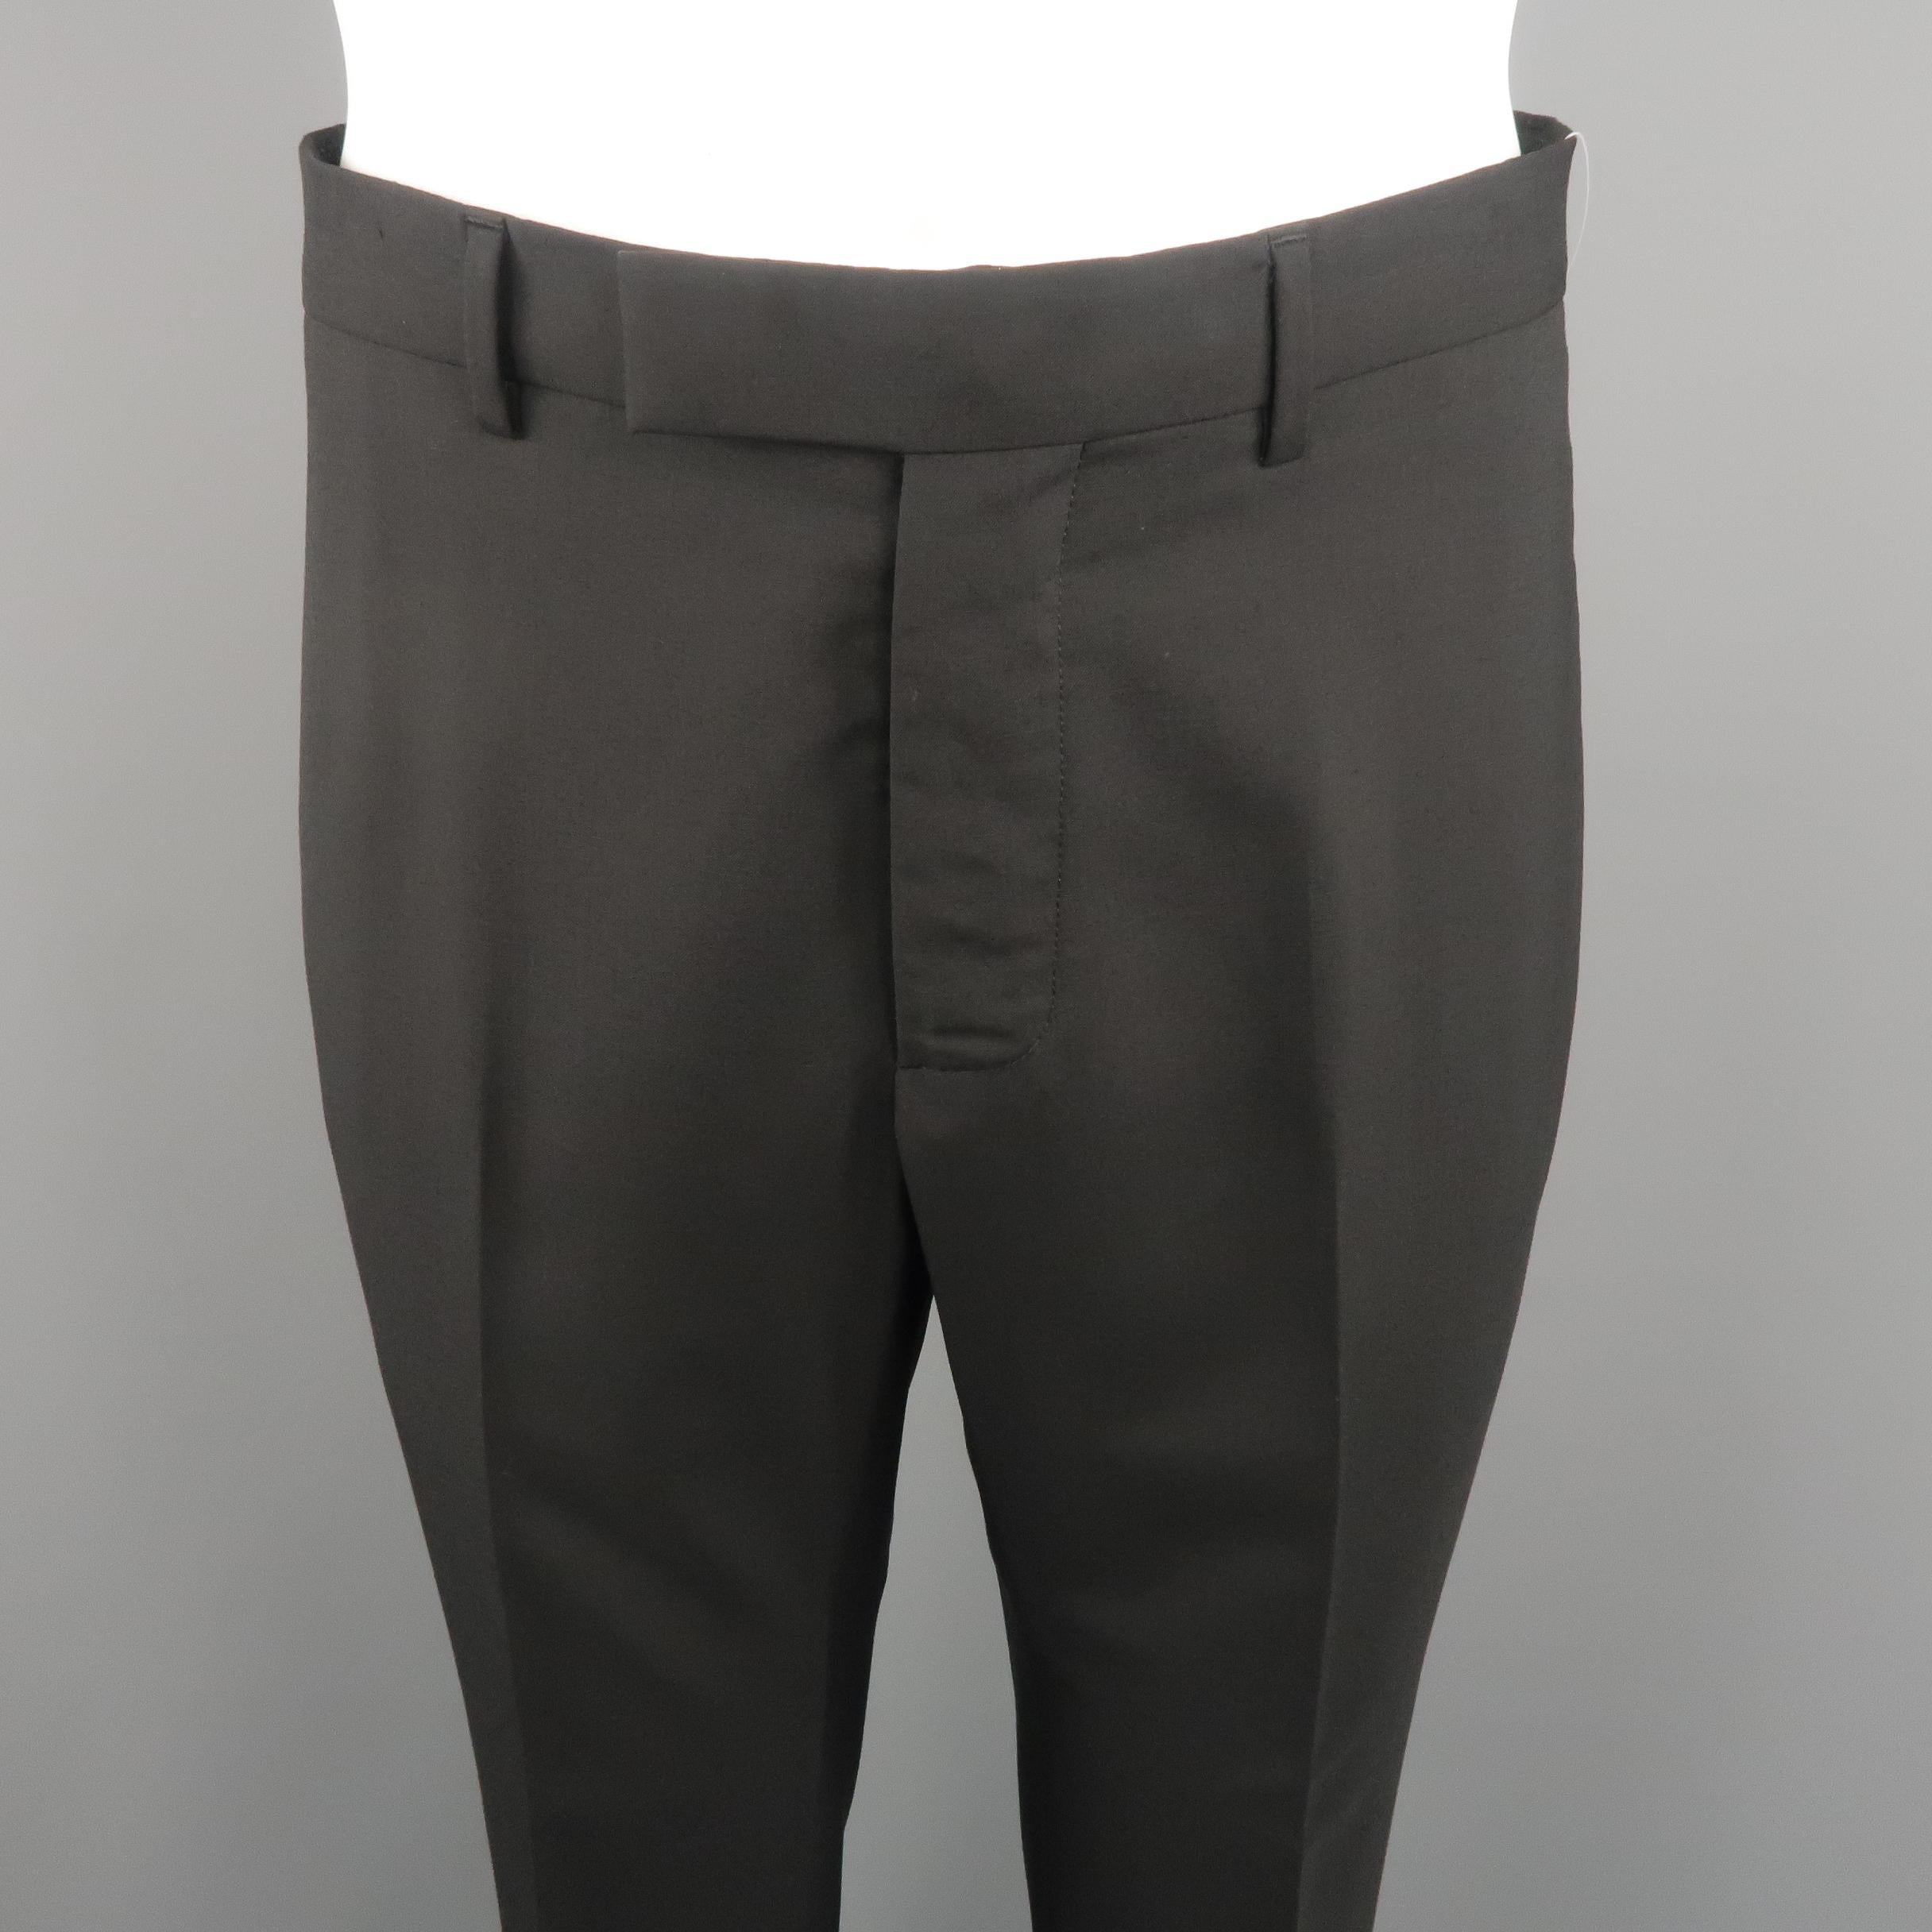 DIOR HOMME dress pants come in black tone in solid wool material with waistband, slant side pockets and cuffed hem. Made in Italy.
Excellent Pre-Owned Condition.
Marked: 48  IT
 
Measurements:
 
Waist: 34 in.
Rise: 9 in.
Inseam: 31 in.